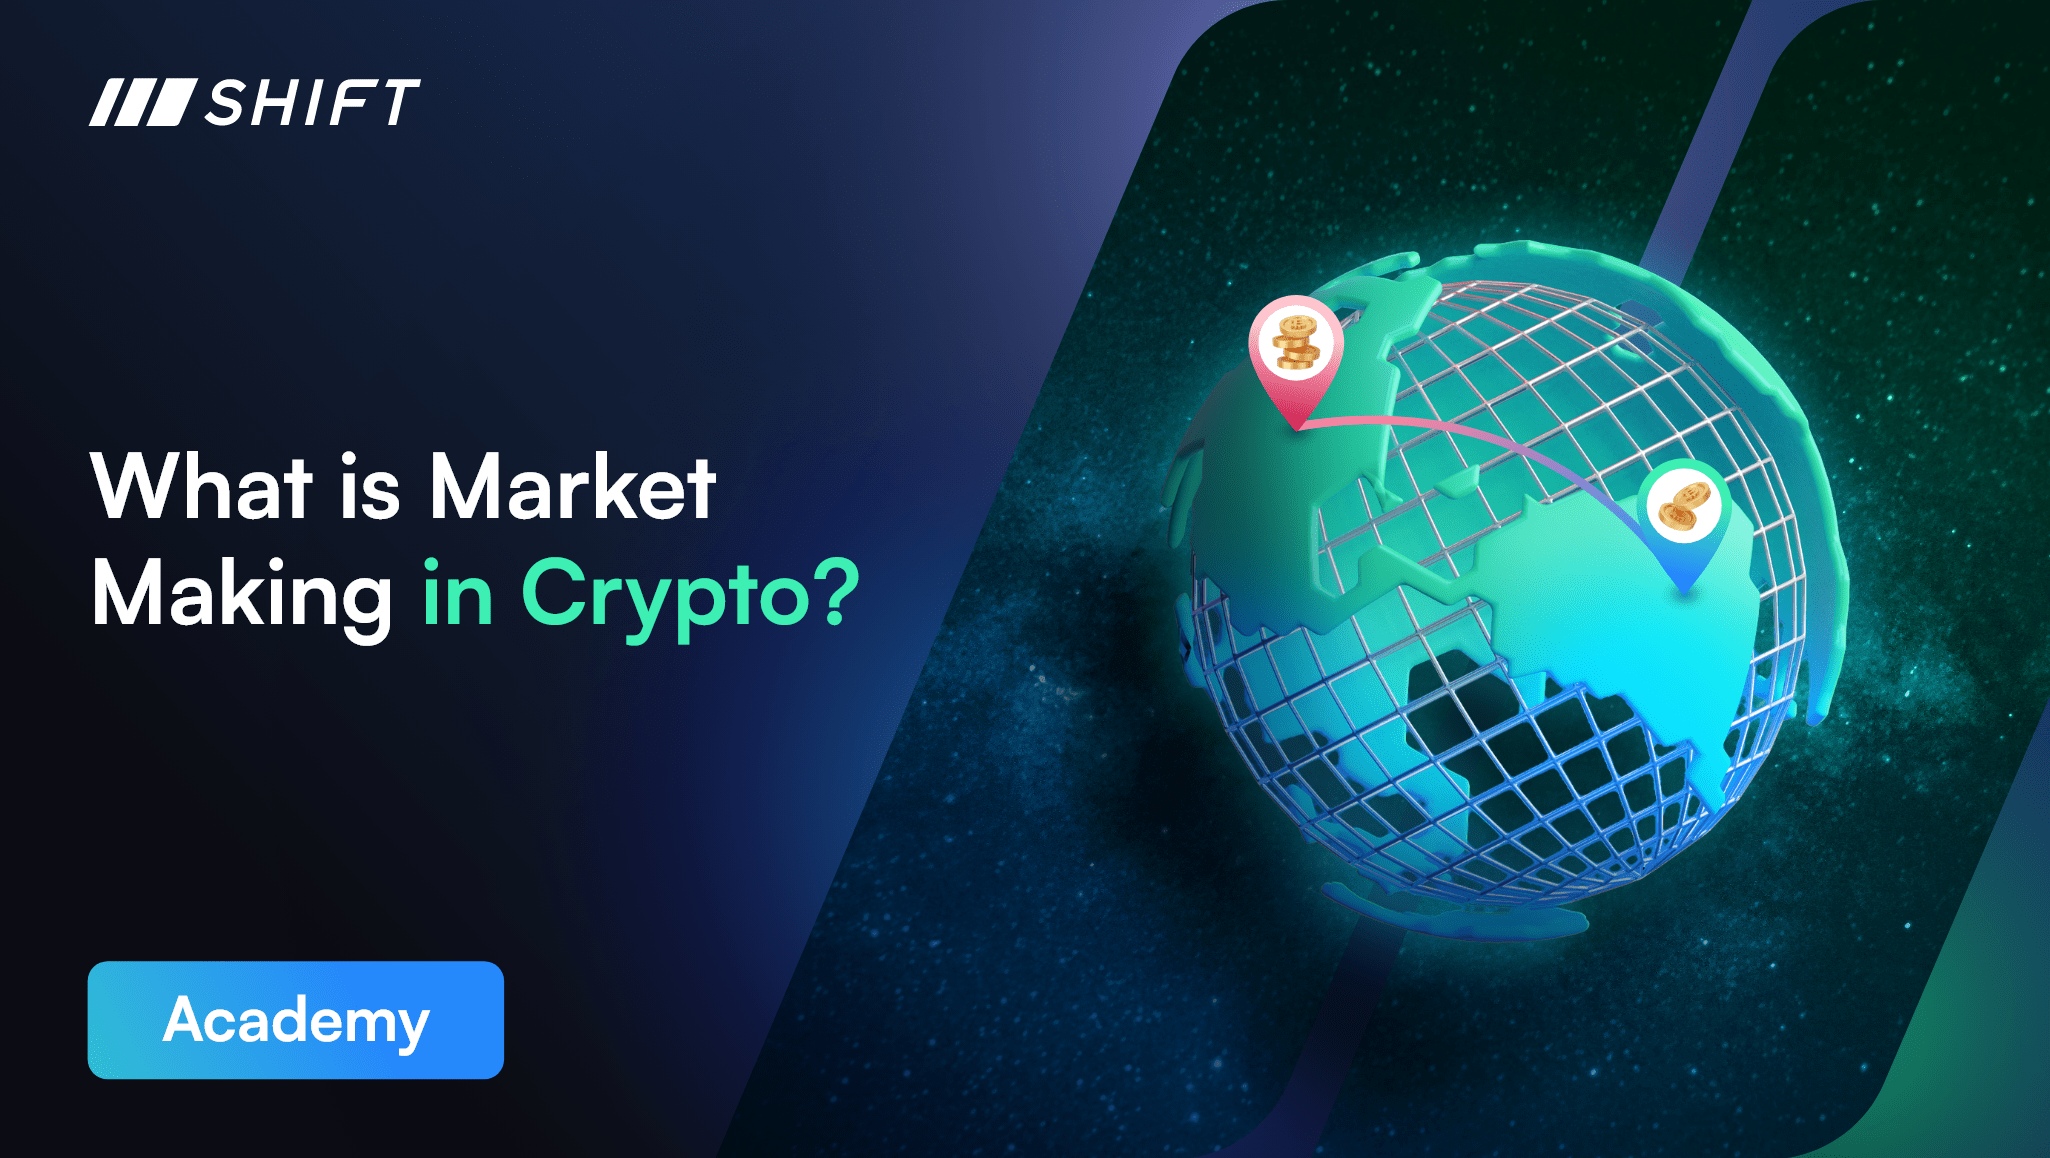 Though seemingly complex at first, crypto market making is actually simpler than it seems.